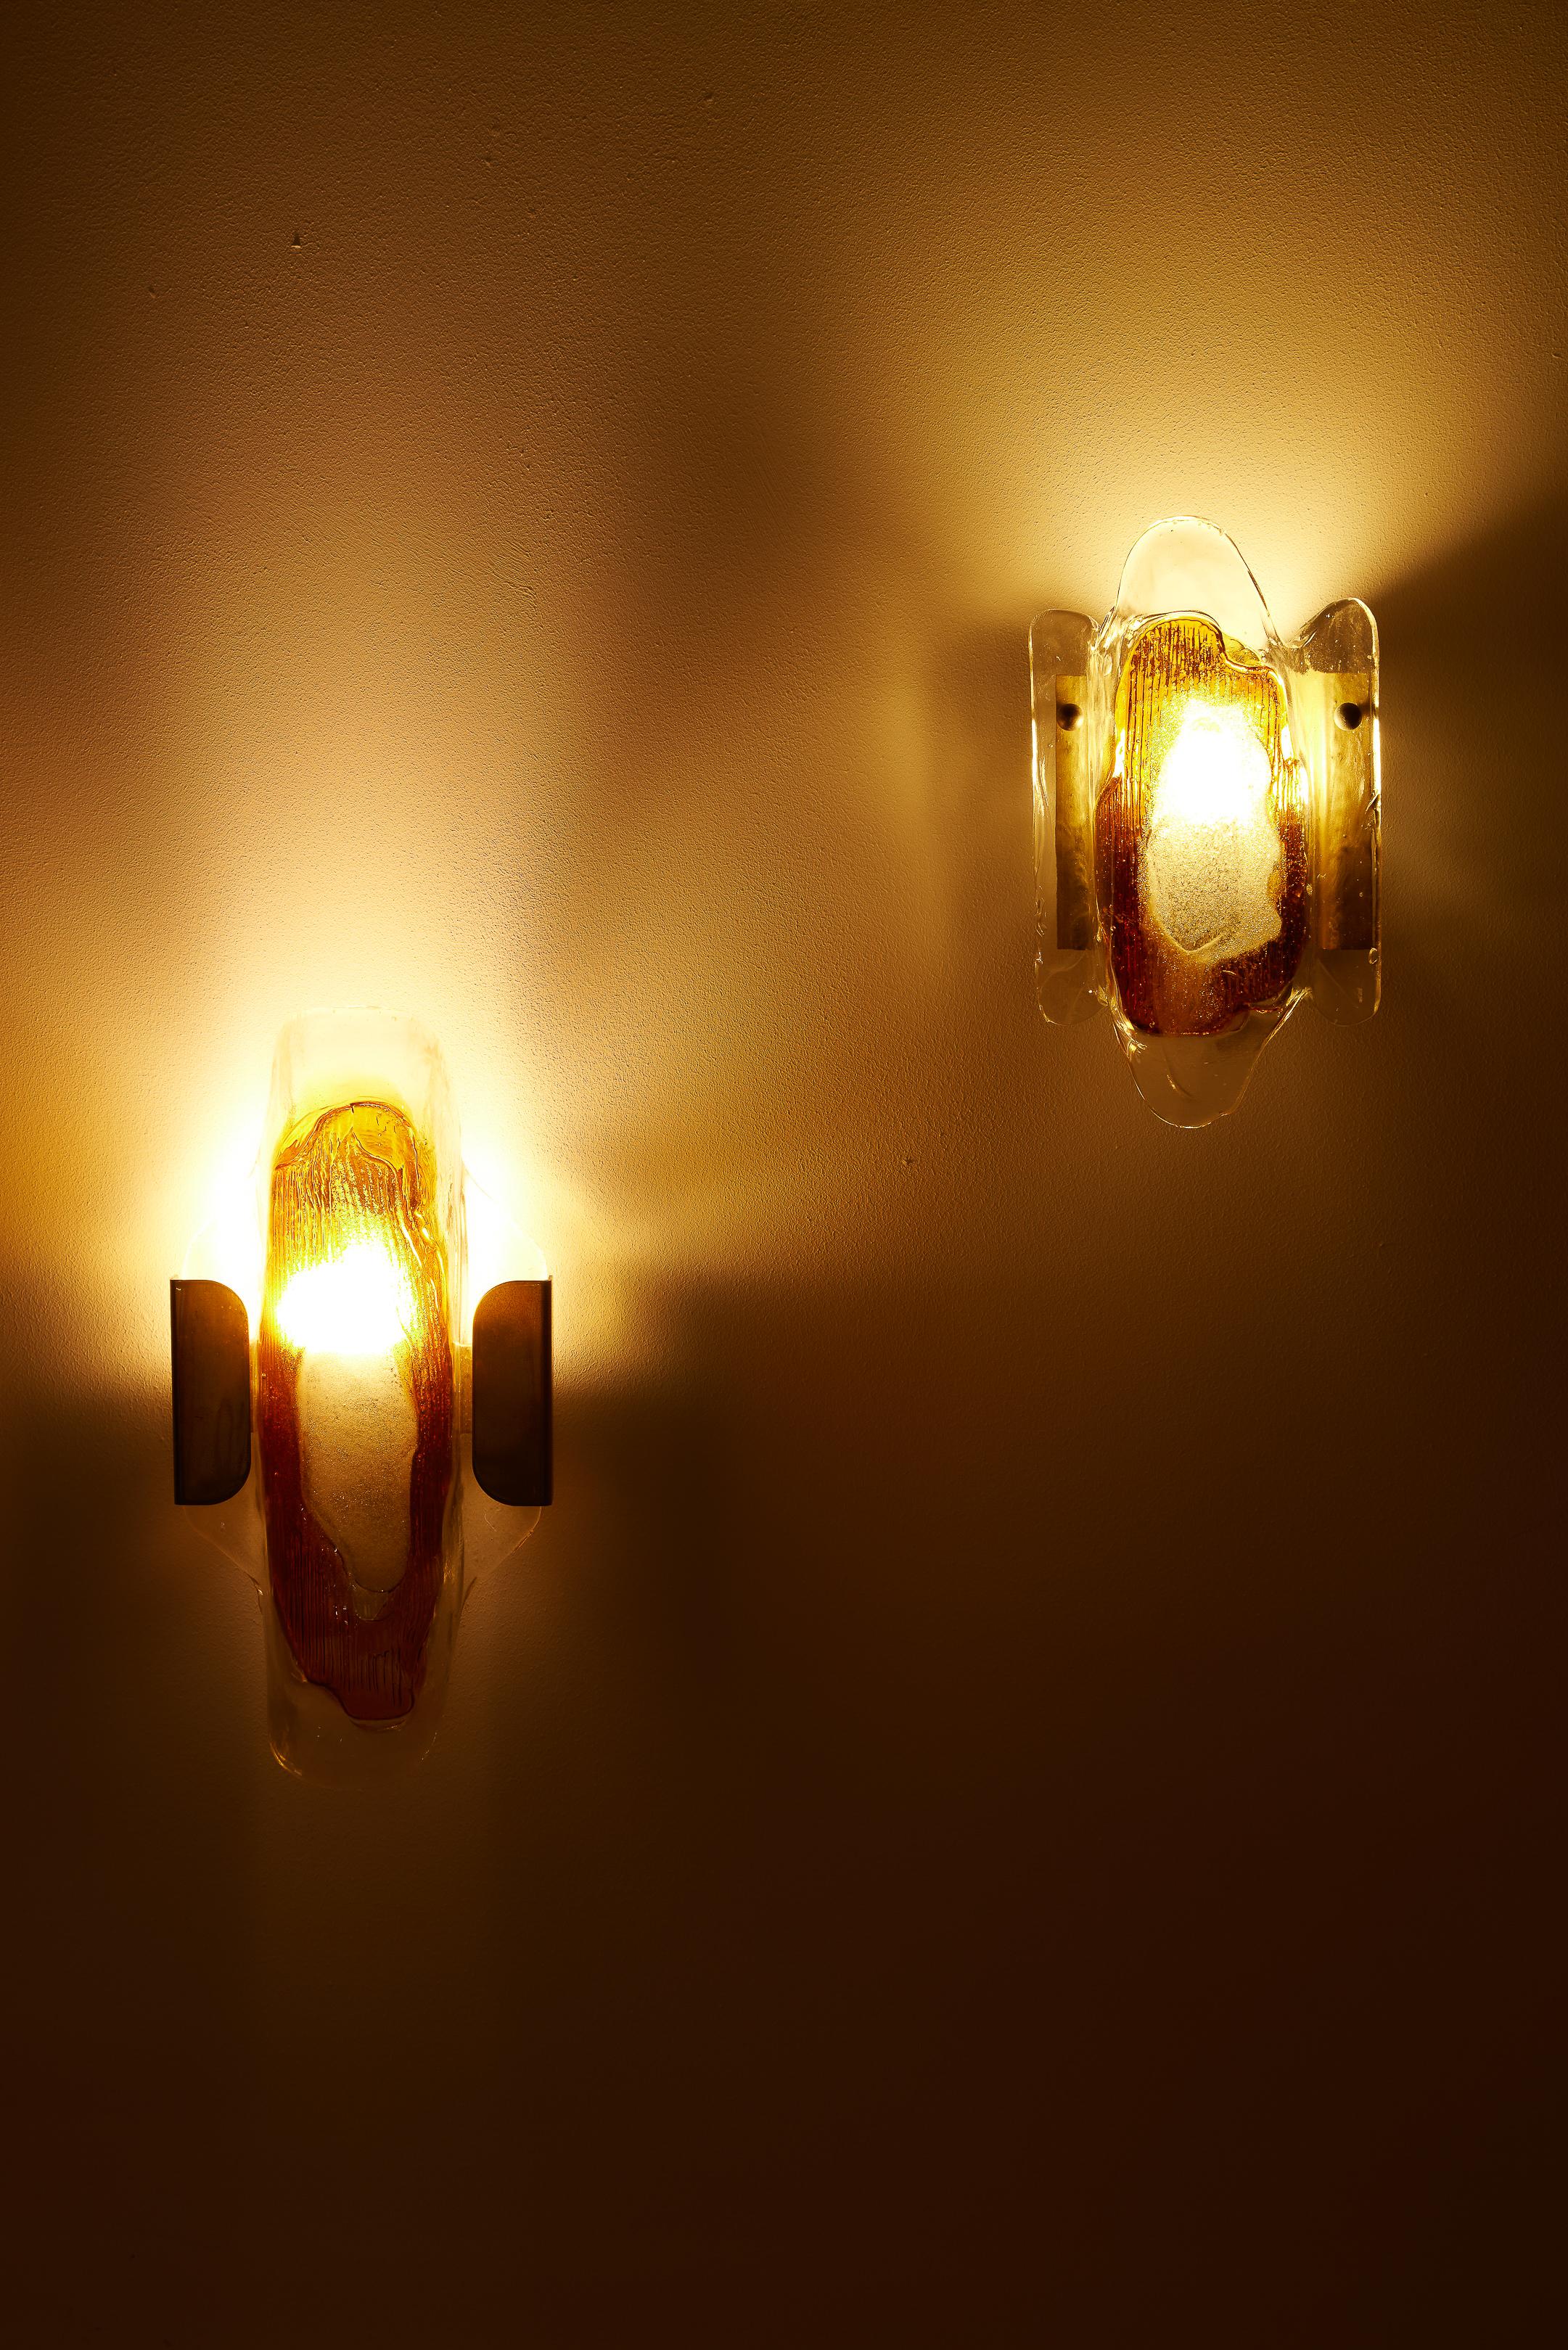 Pair of wall lamps by Danish designer Svend Aage Holm Sørensen (1913-2004), from the 1950s. The diffuser is made of transparent glass with an orange geometric pattern in the center. The structure is in golden brass. In very good